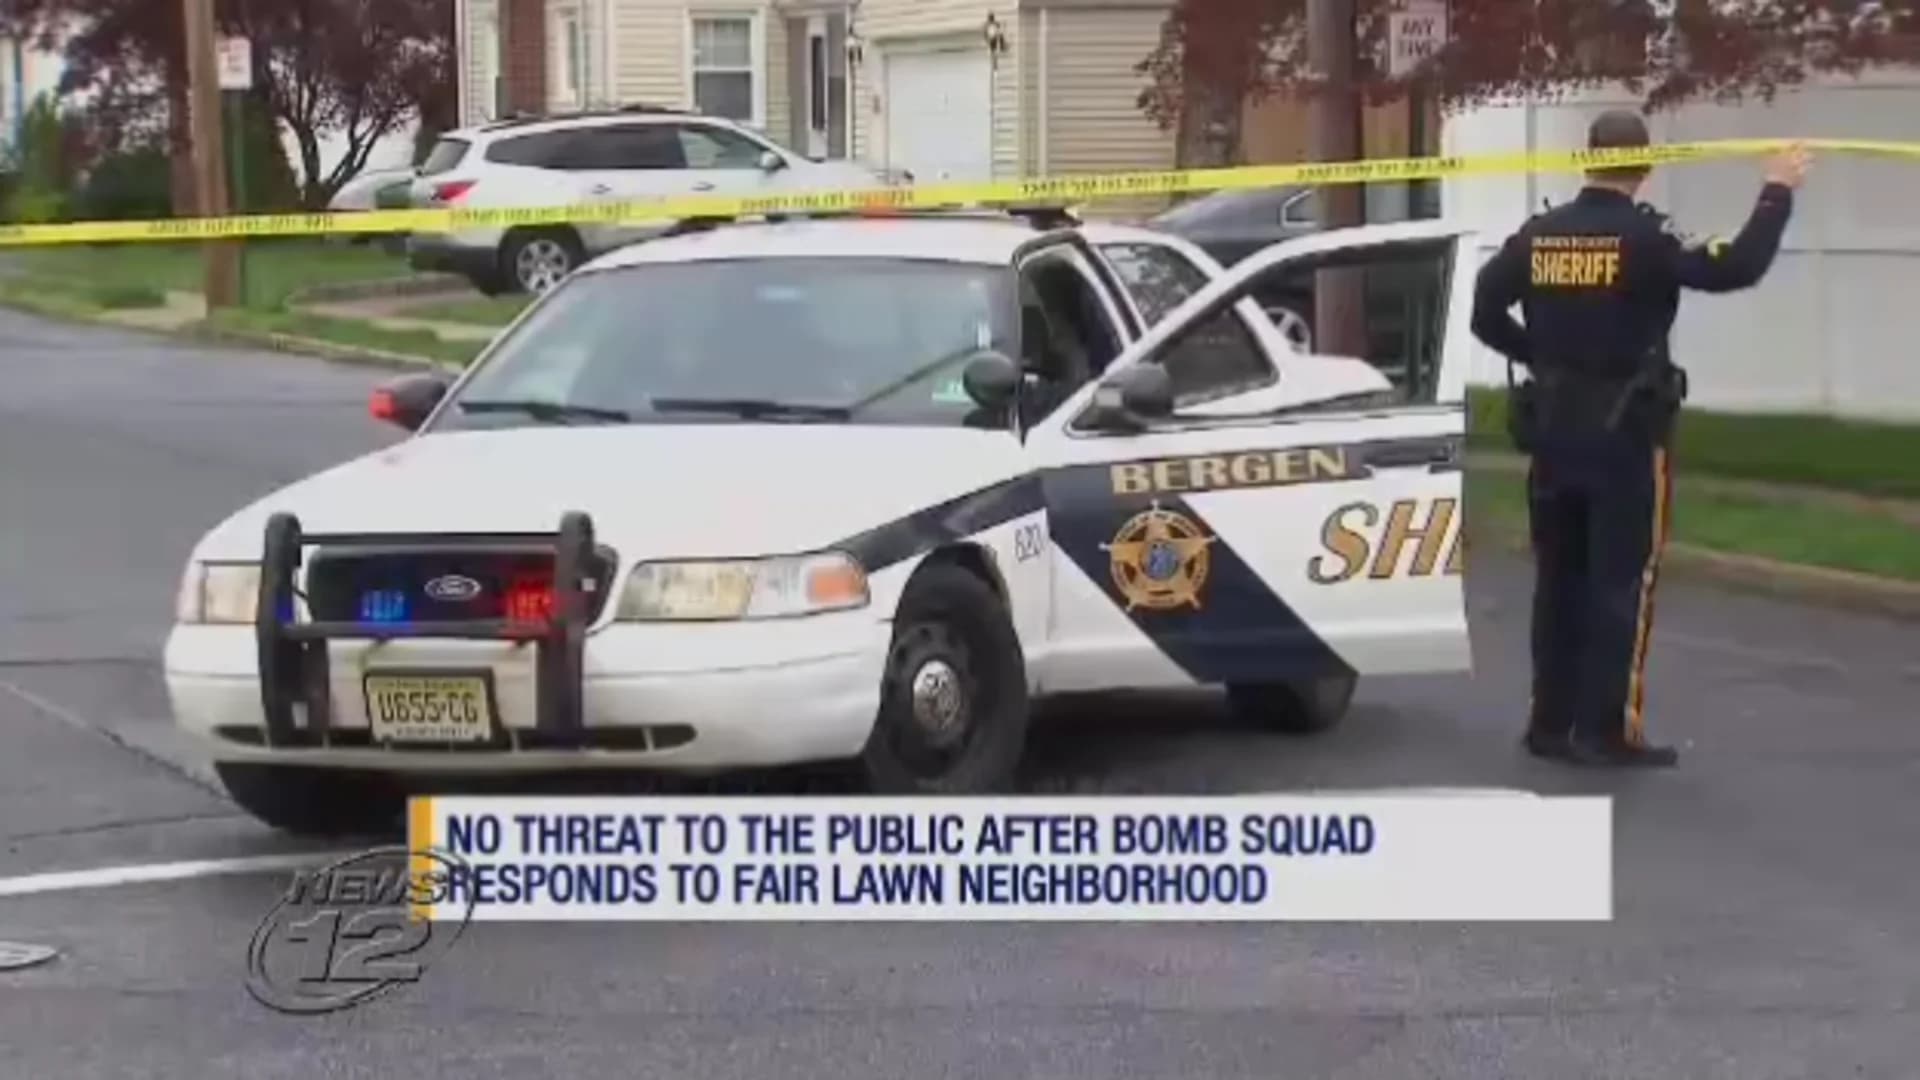 Police: No threat after bomb squad investigates suspicious packages